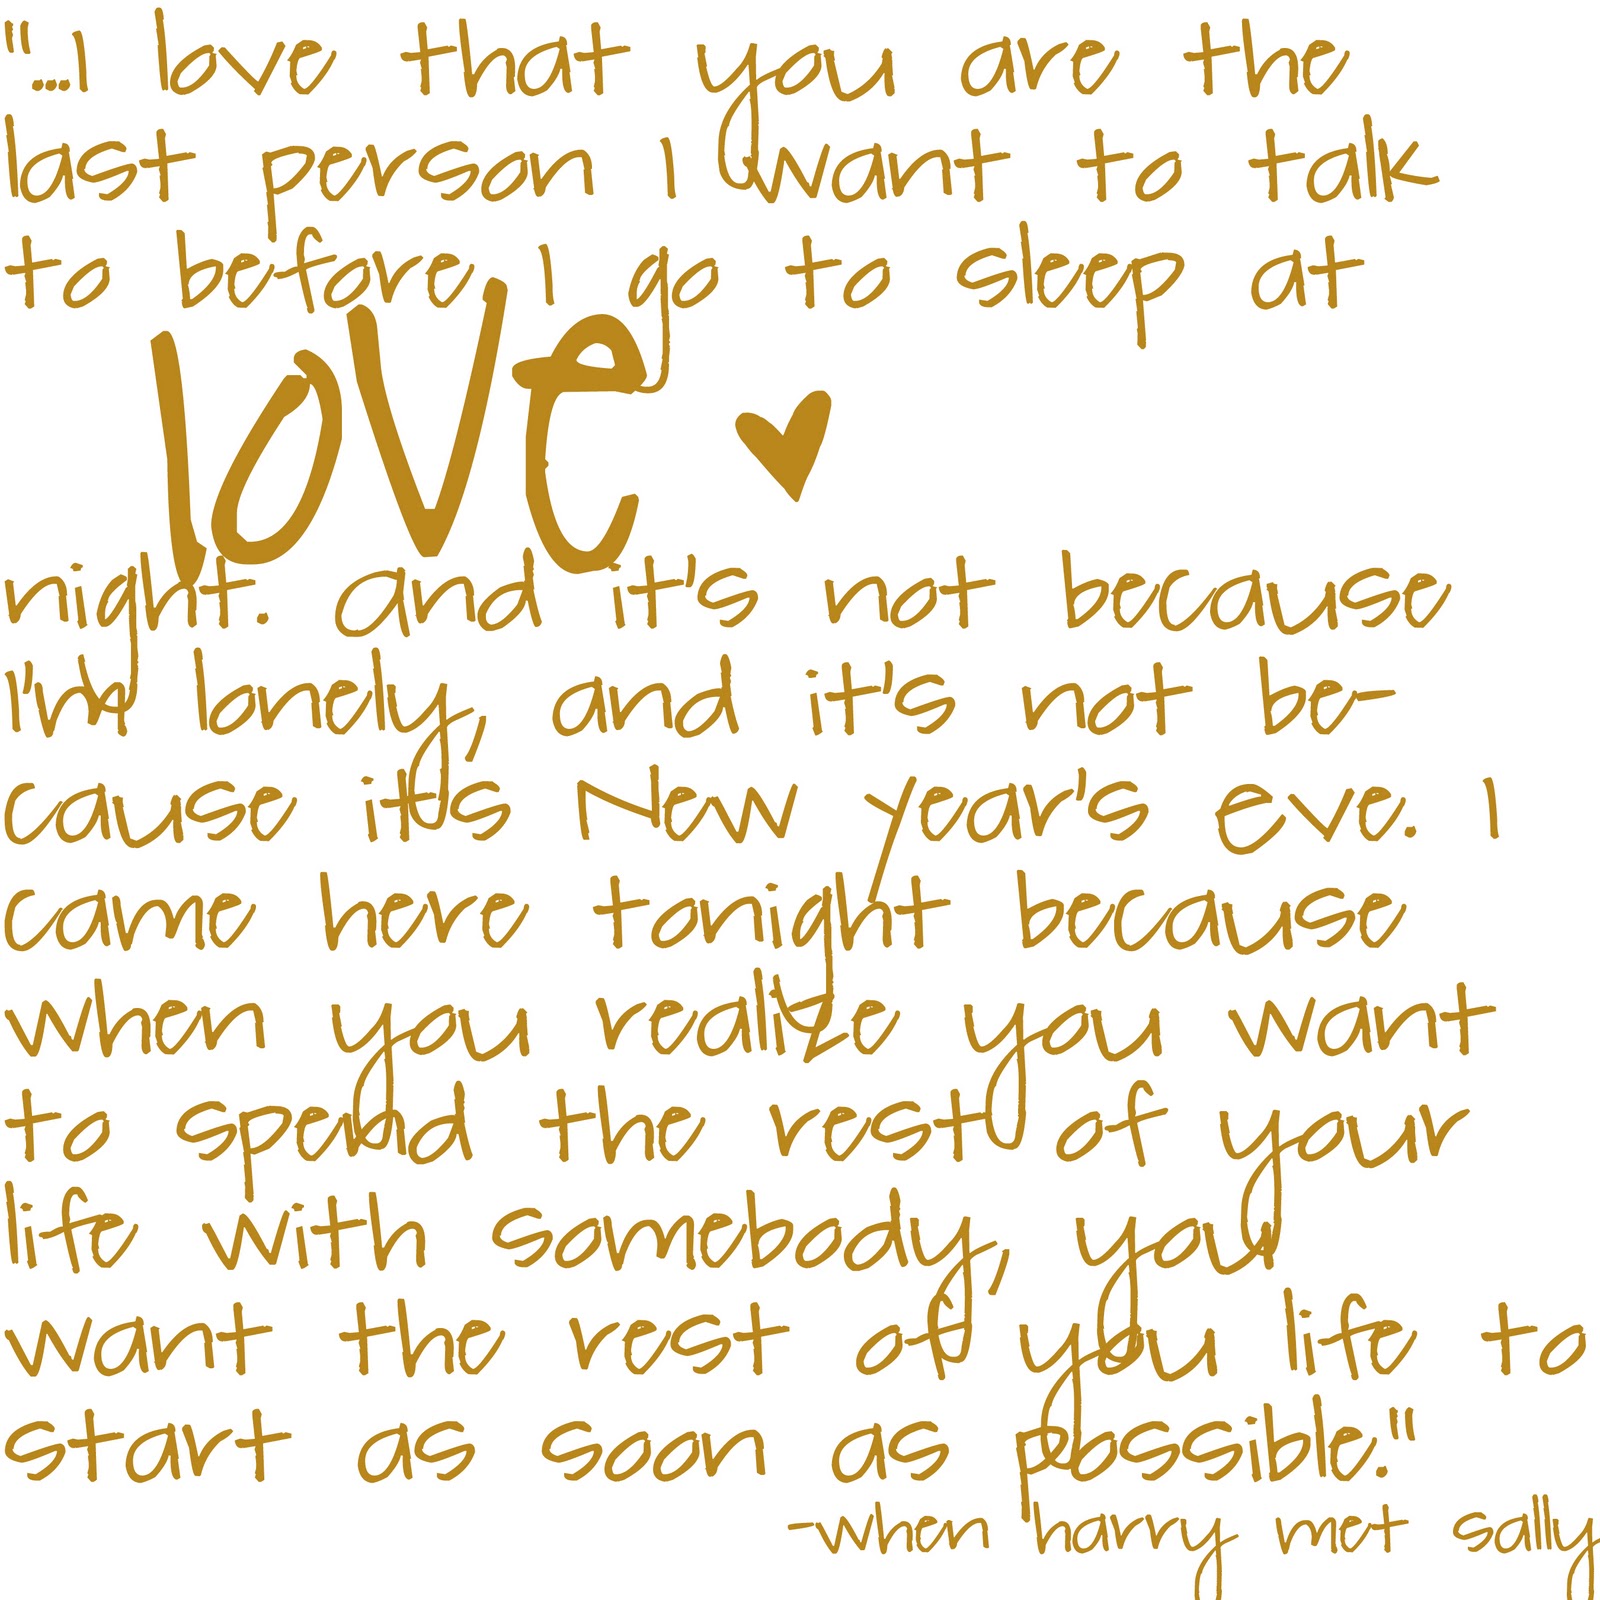 17 love quotes in love quotes in love quotes in love quotes in love